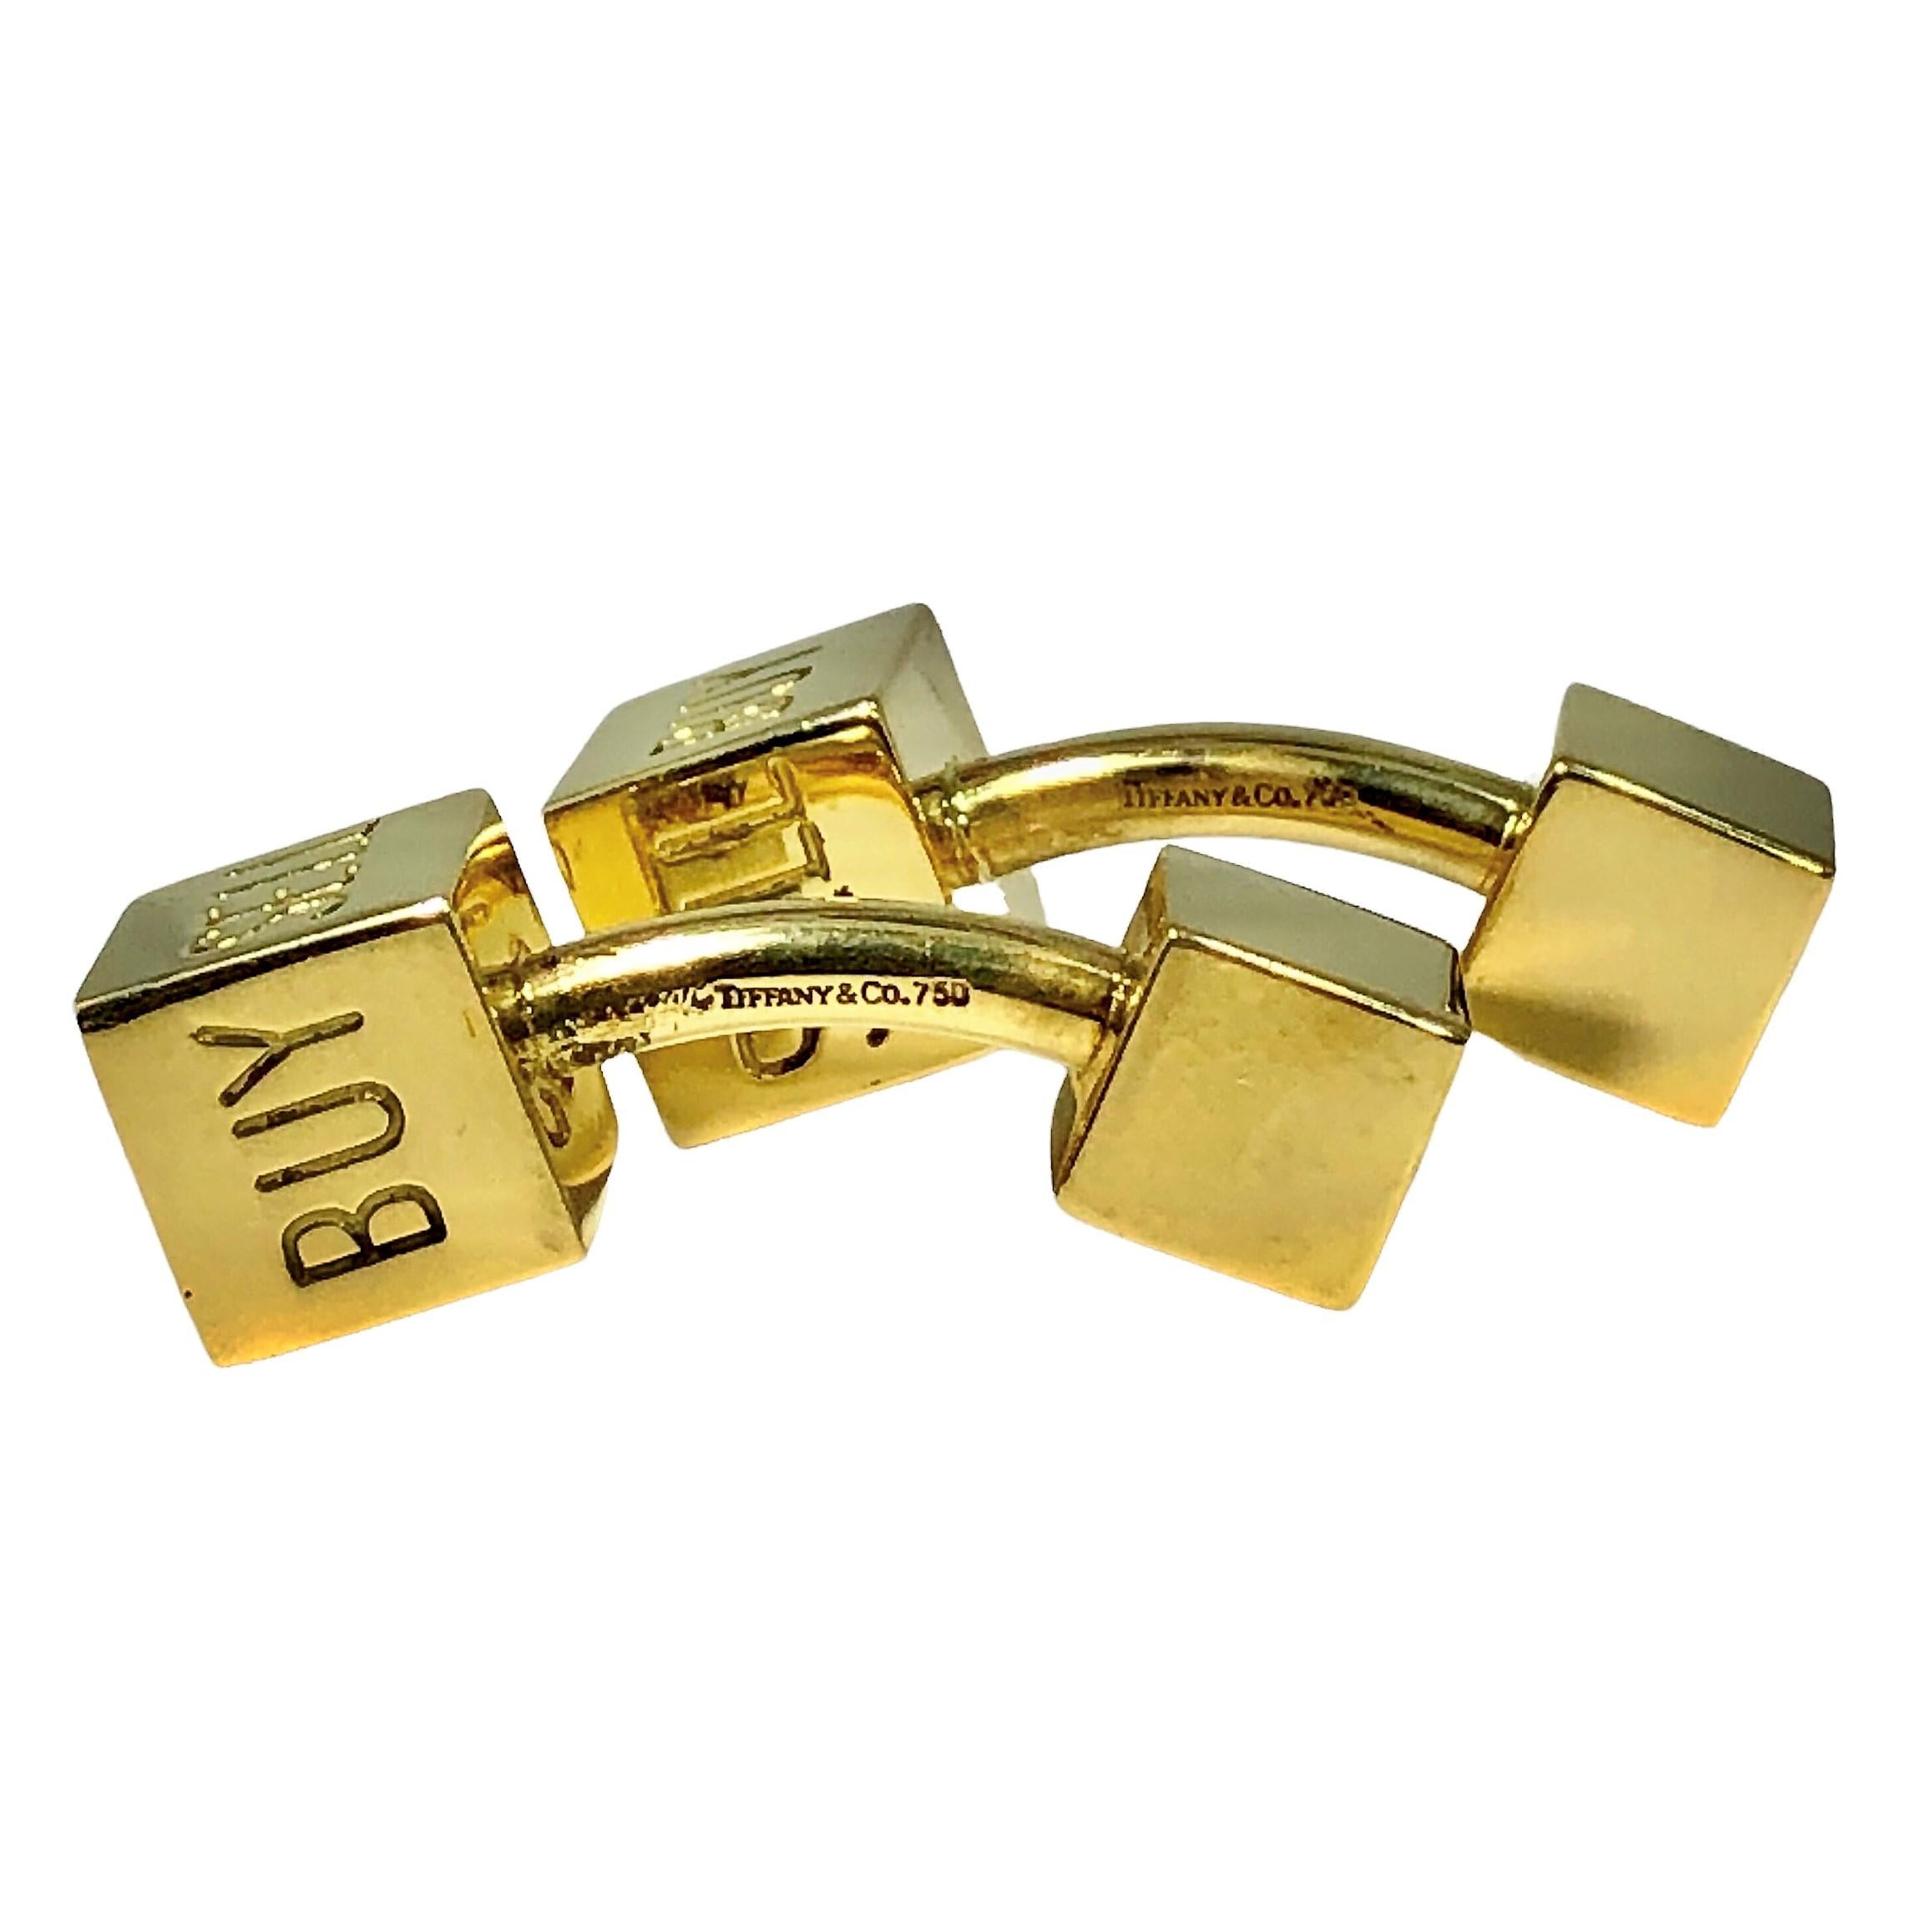 This pair of 18K yellow gold Tiffany cuff links were specifically created with the 